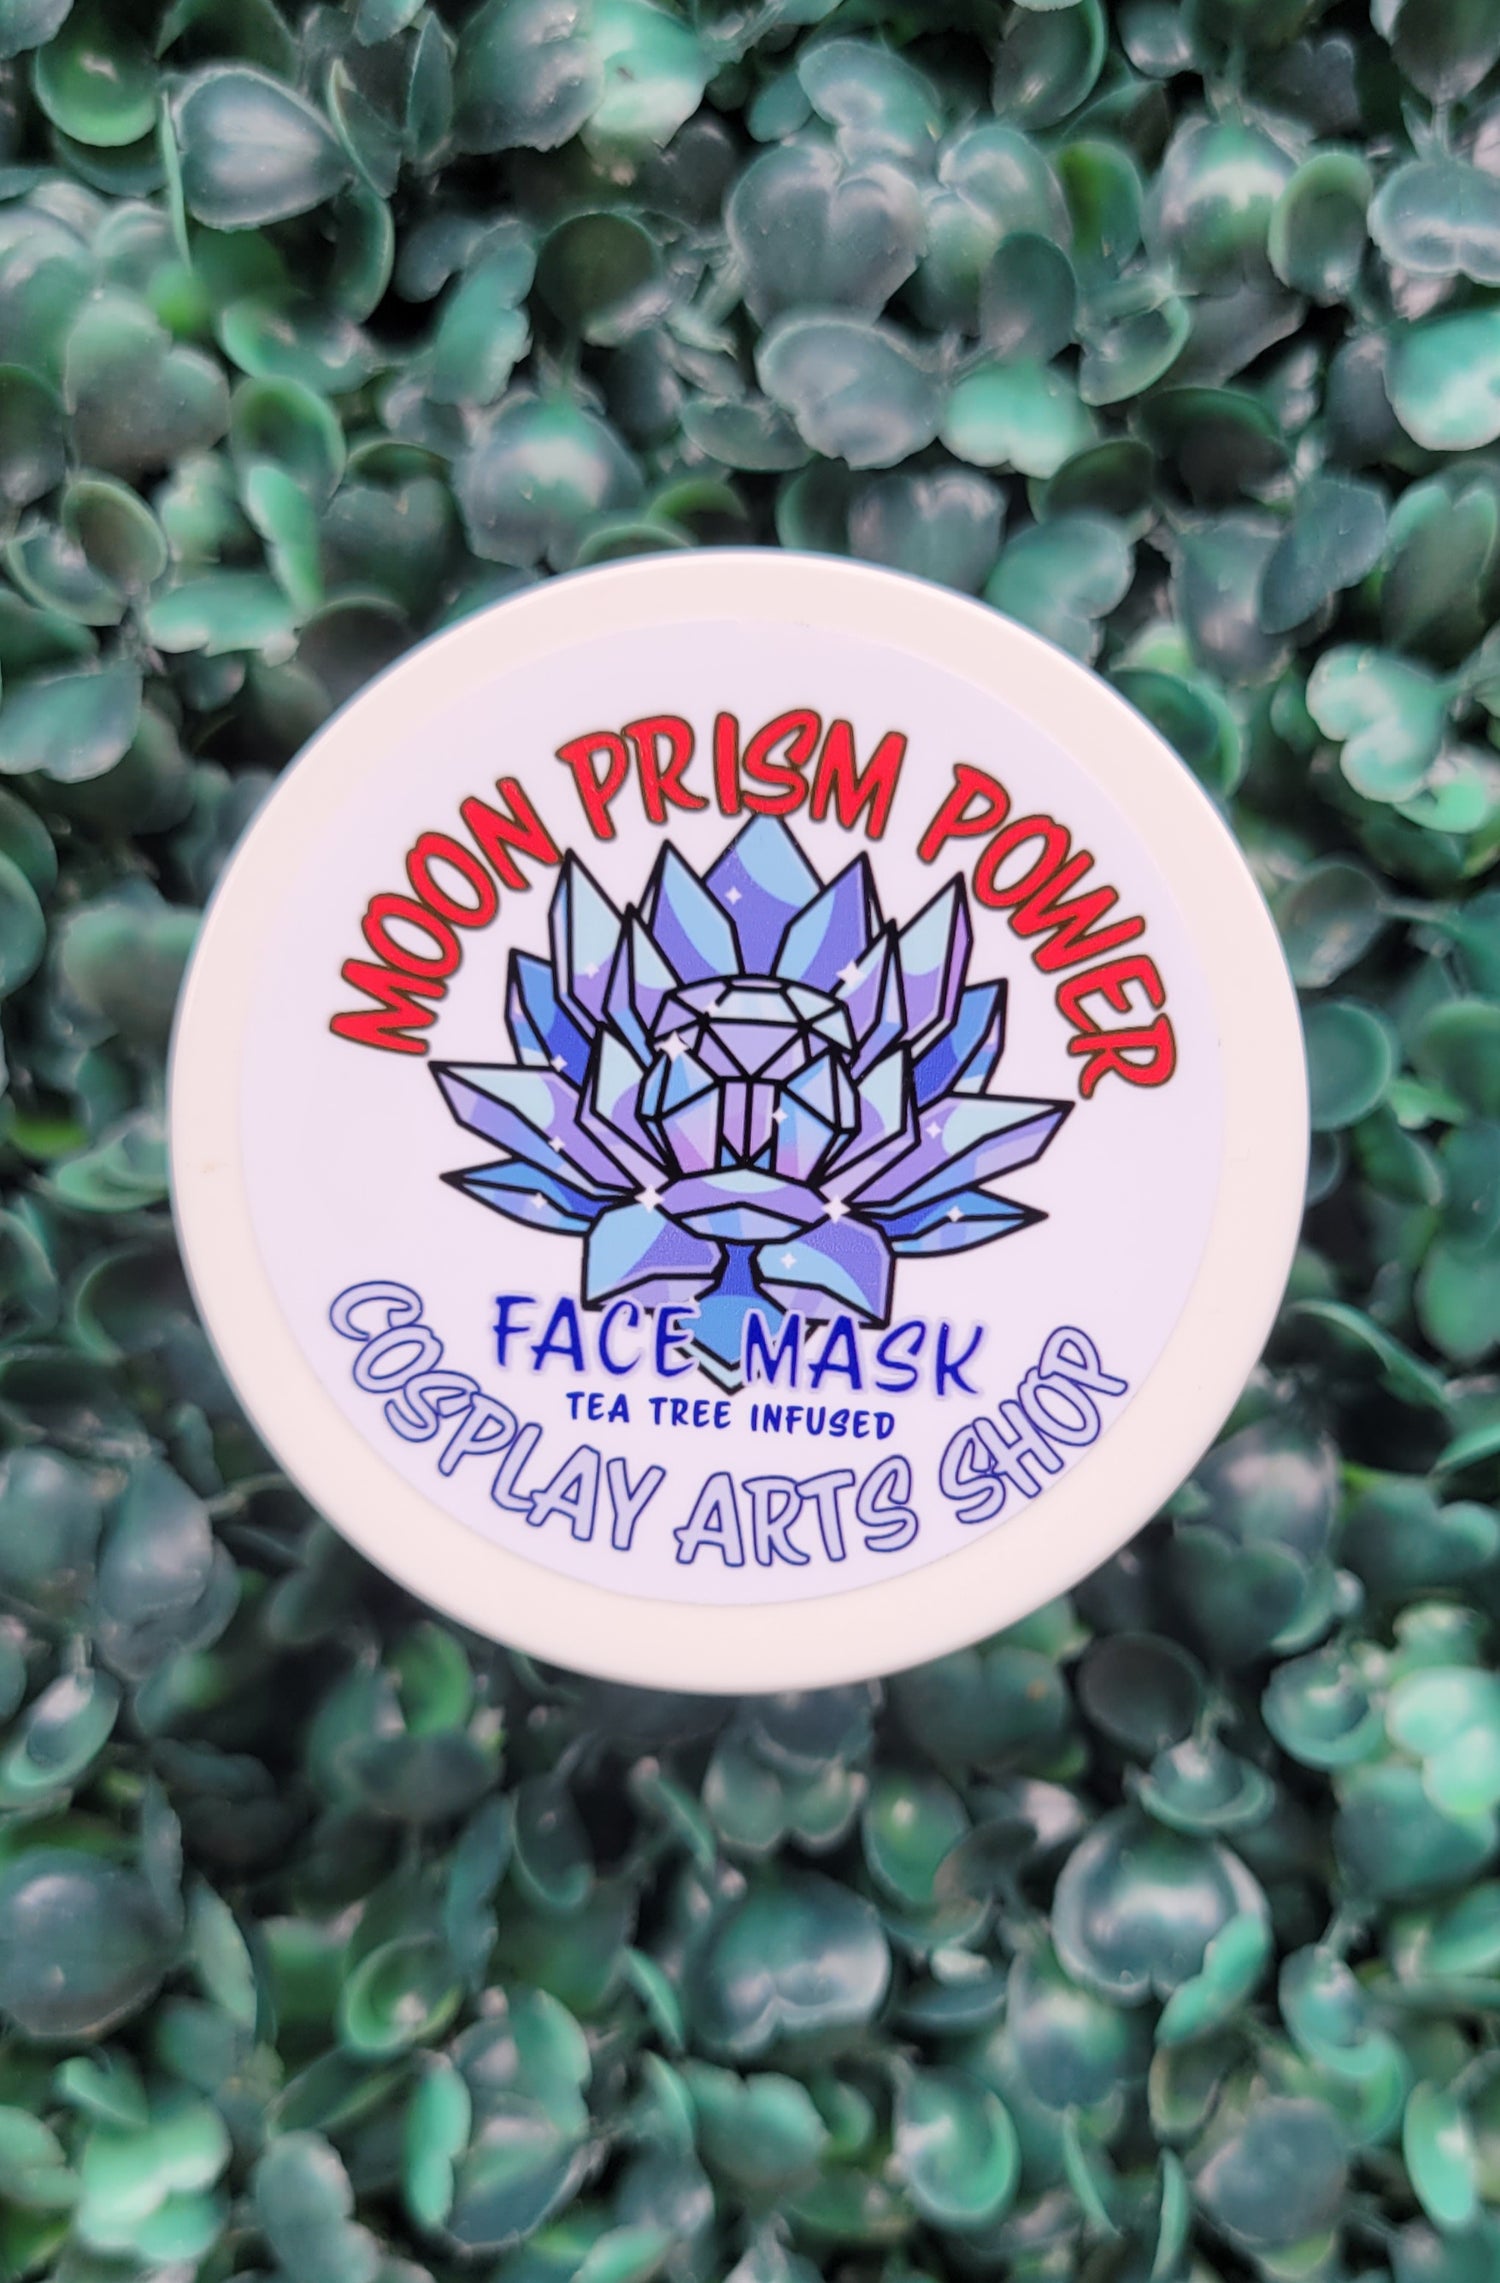 Moon Prism Power! Sailor Scout Face Clay Mask - Cosplay Arts Shop